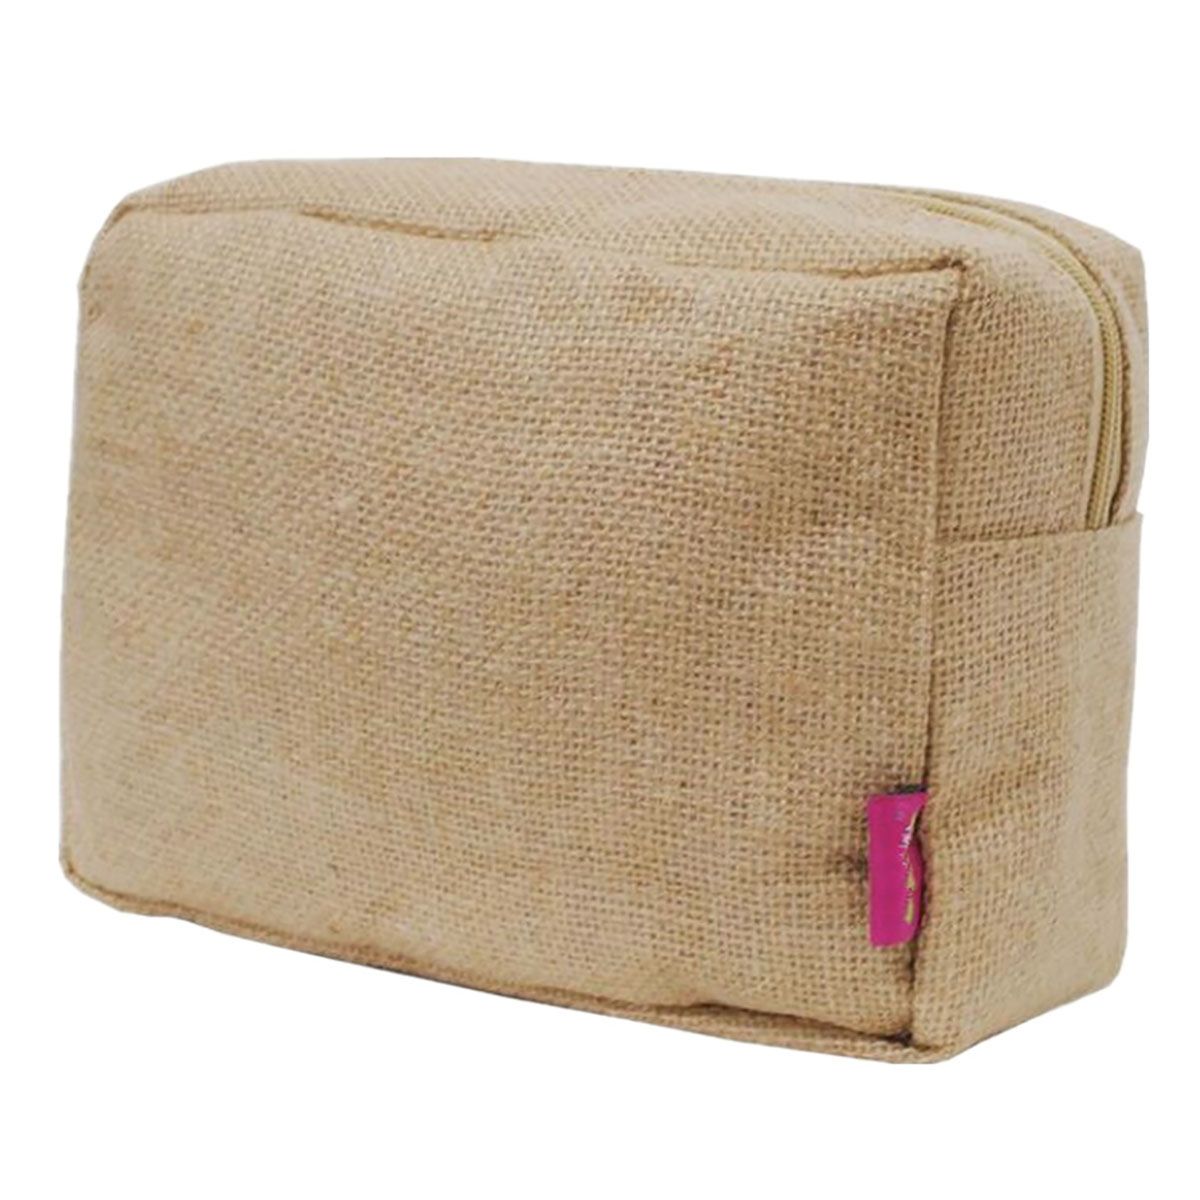 How to choose the right cosmetic bag for the shop and store